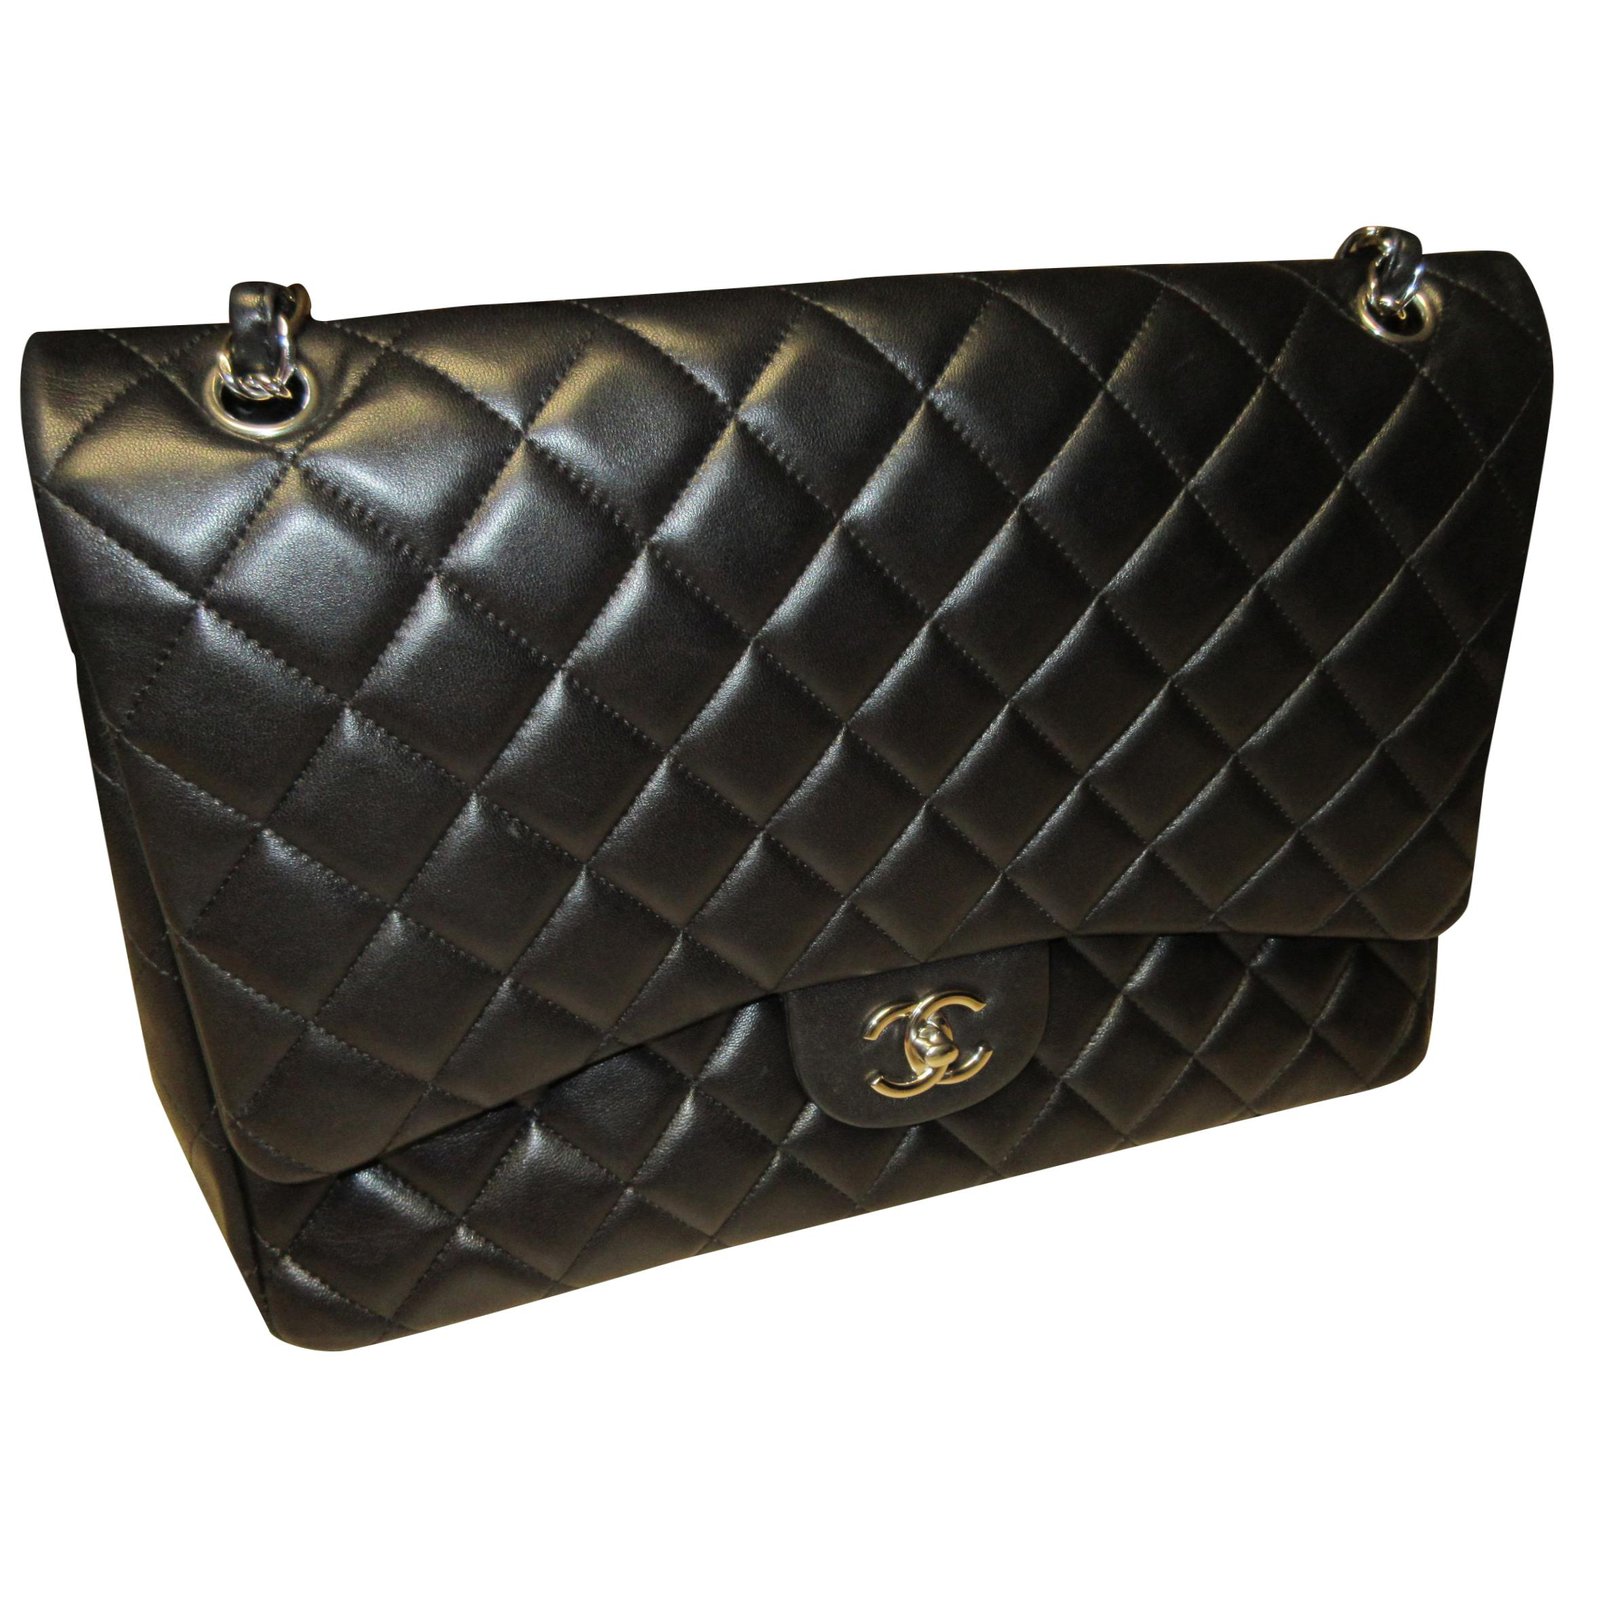 CHANEL JUMBO FLAP BAG REVIEW  A look at my VINTAGE Chanel Jumbo 